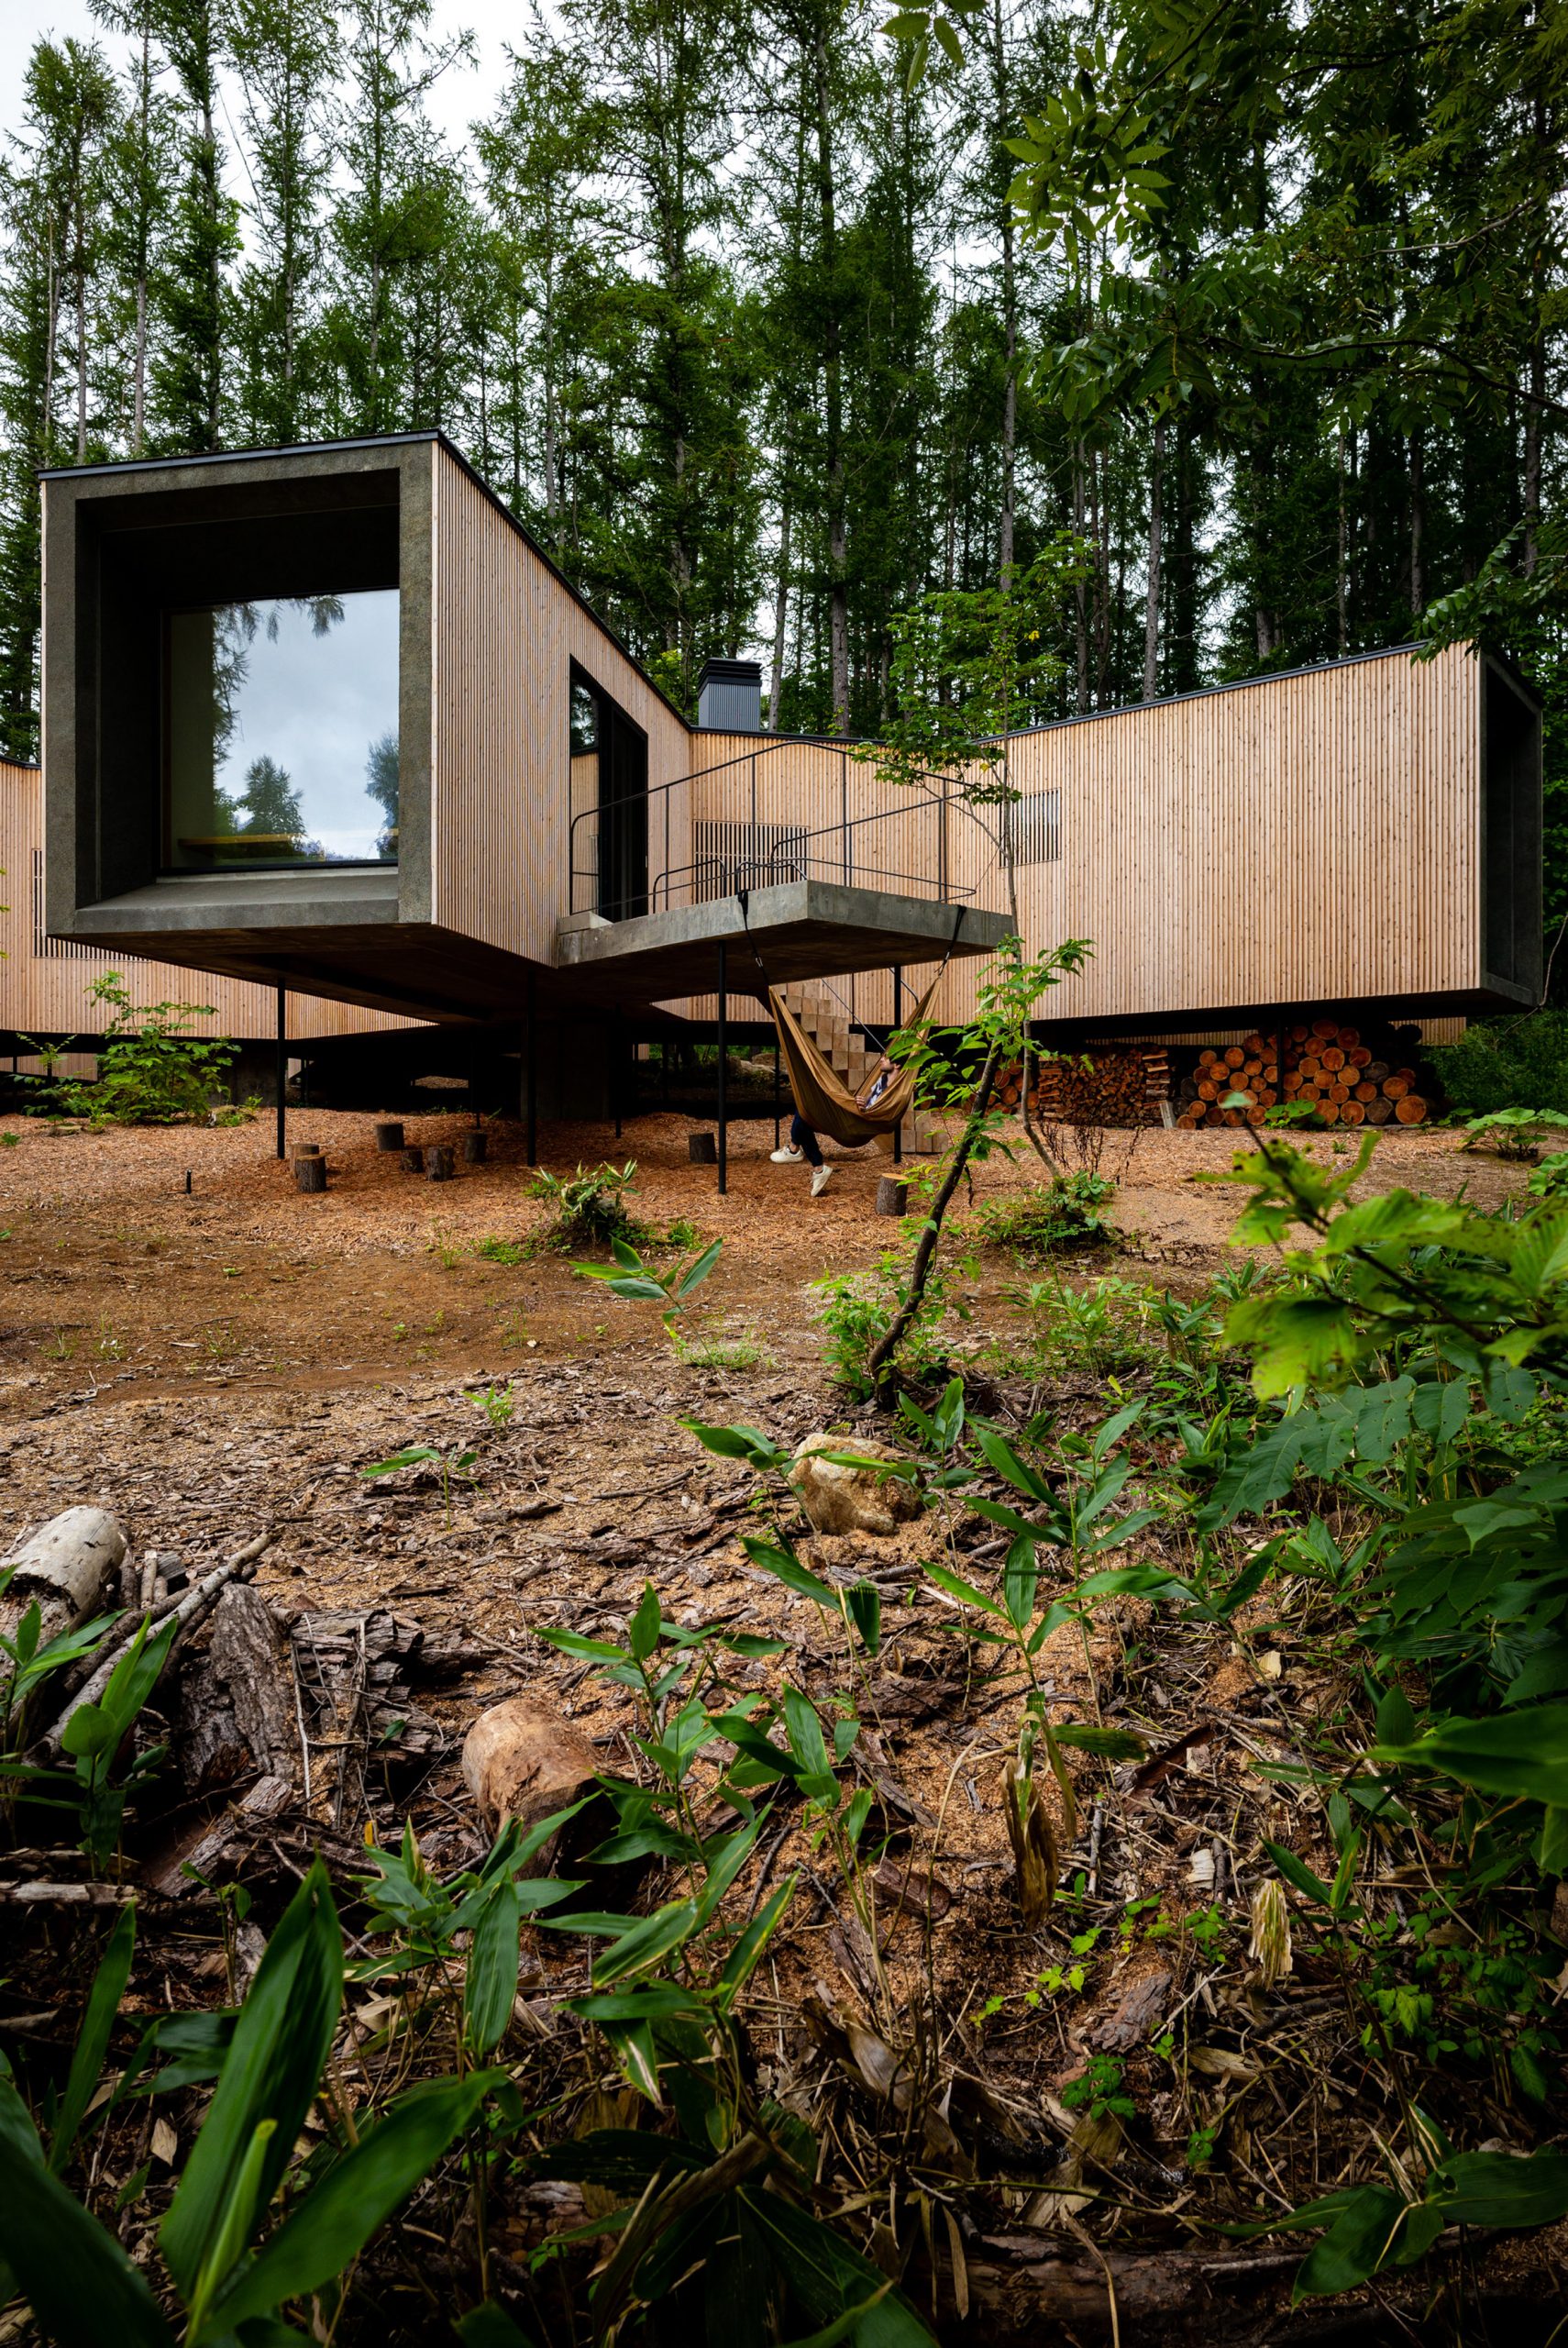 The home sits on steel stilts atop of the sloped terrain